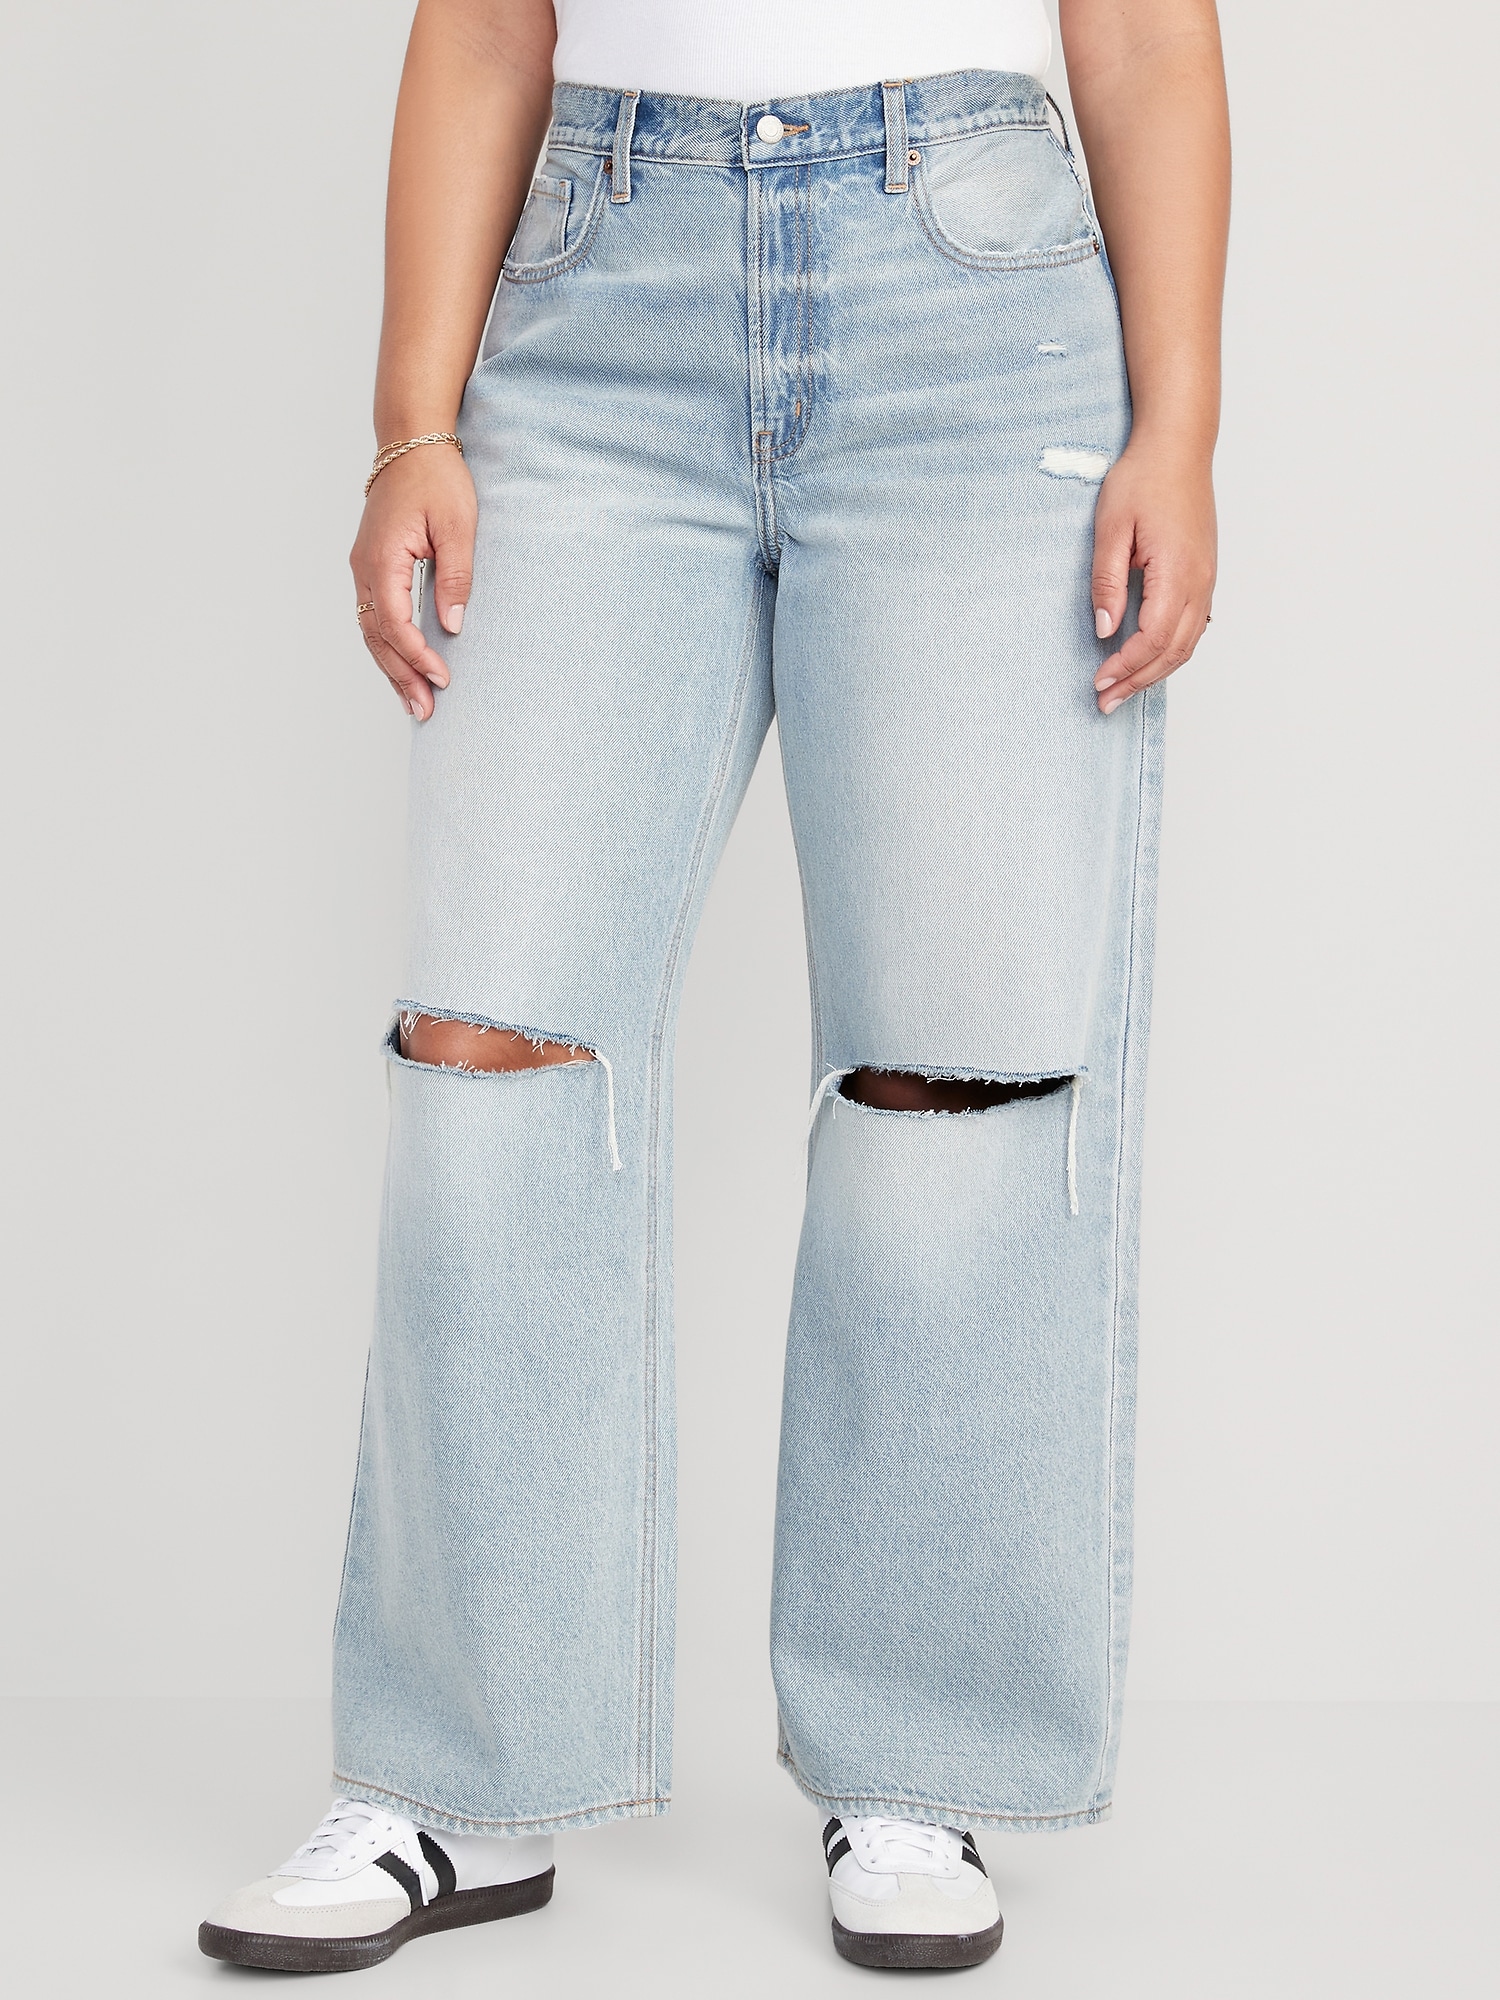 Retro Oversized Denim Wide High Jeans With Ripped Holes And Distressed  Design For Women Big Loose Fit Joggers With Bottom Style 0138 From Xx2015,  $29.19